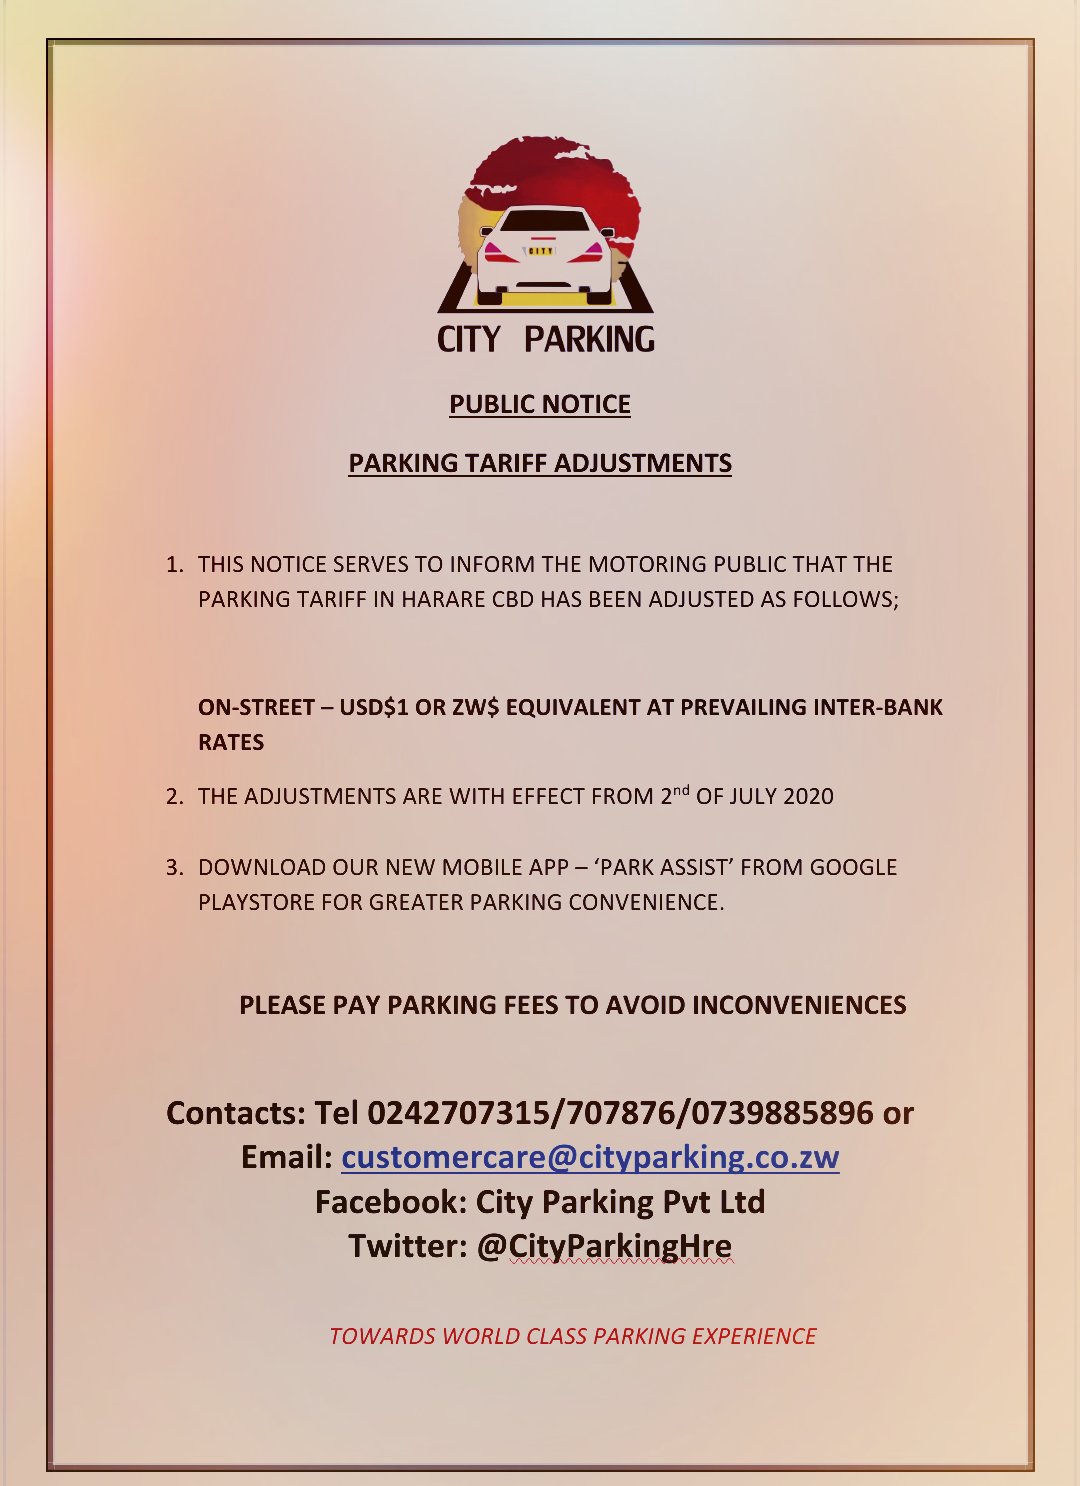 Parking fees in Harare- IHarare